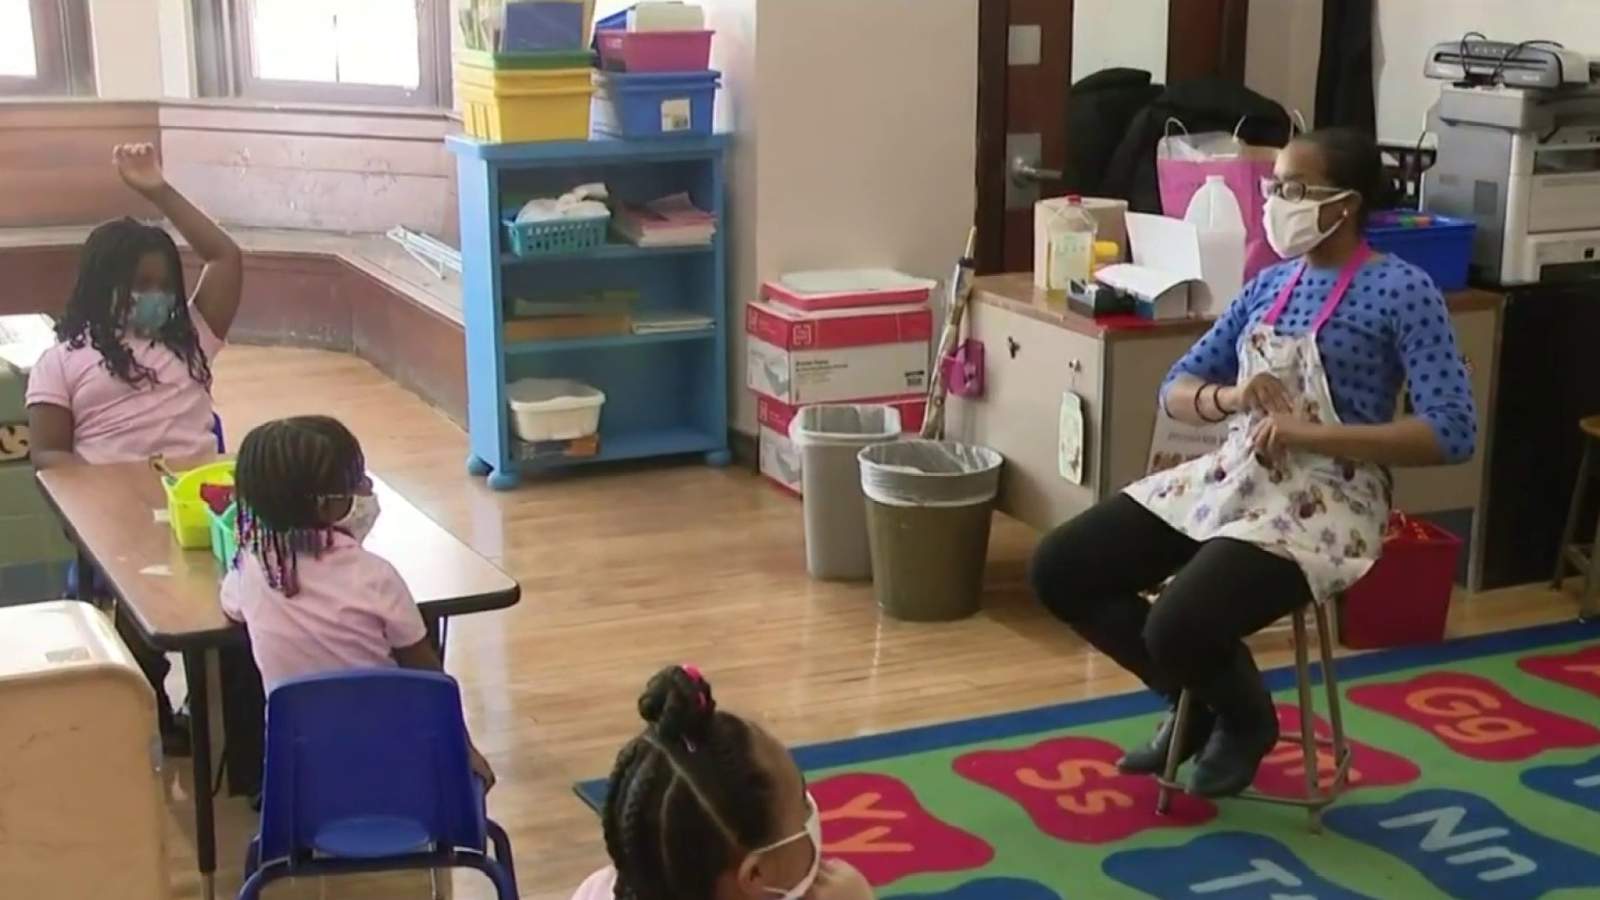 Detroit public schools reopen learning centers after COVID closures